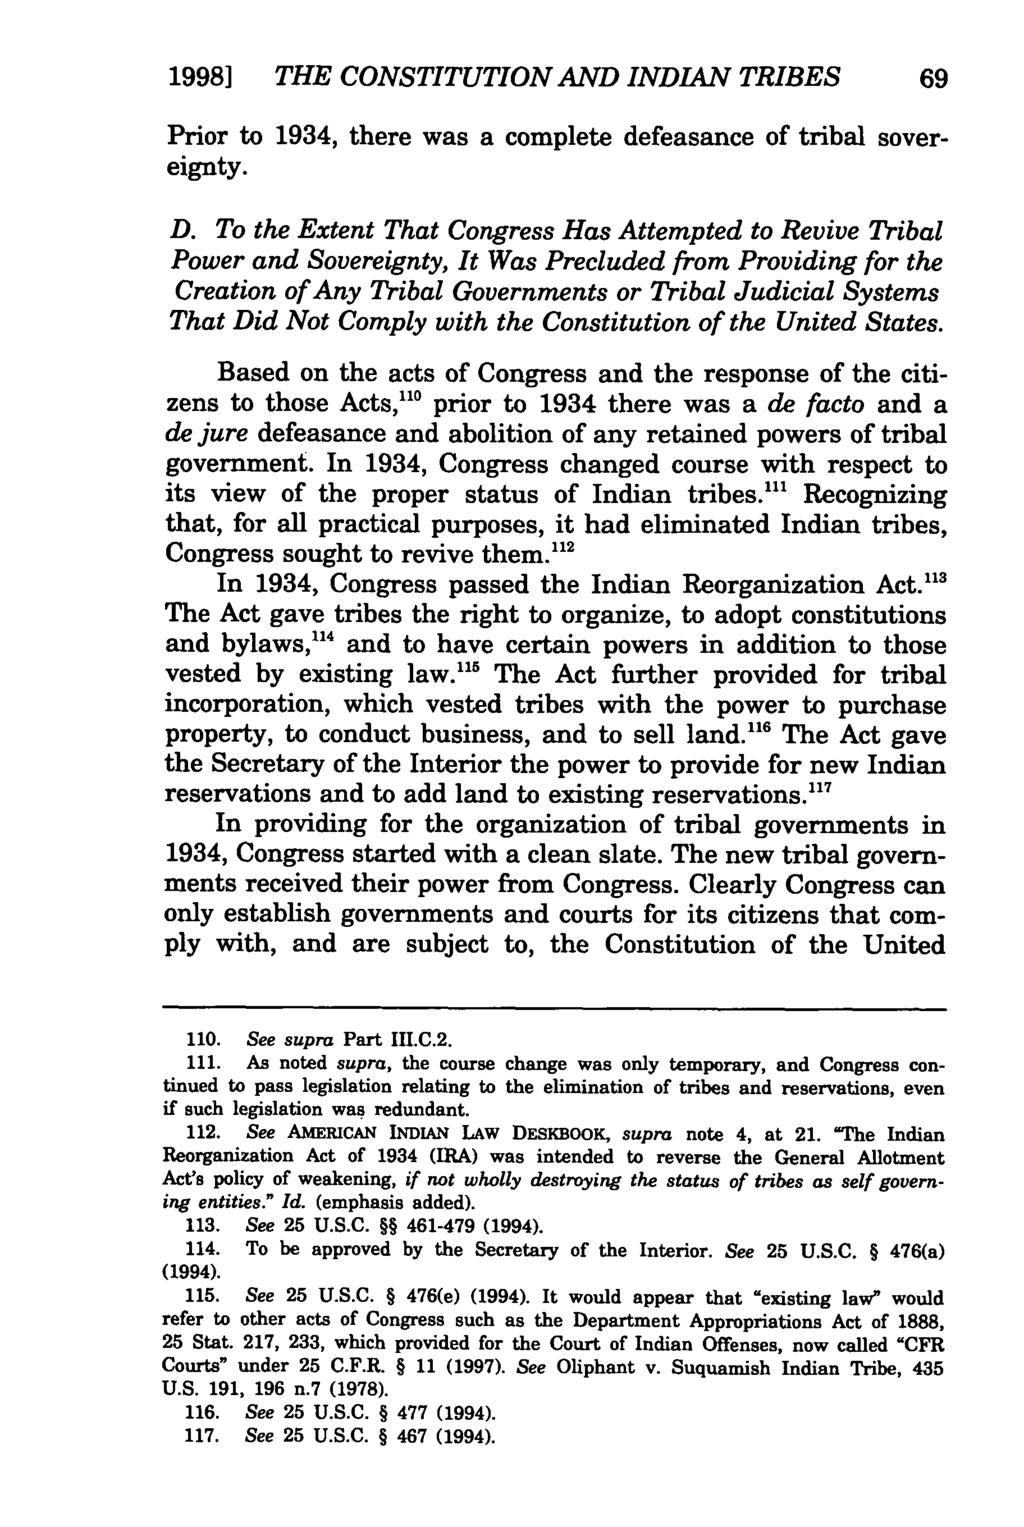 Poore: The Constitution of the United States Applies to Indian Tribes 1998] THE CONSTITUTION AND INDIAN TRIBES 69 Prior to 1934, there was a complete defeasance of tribal sovereignty. D.